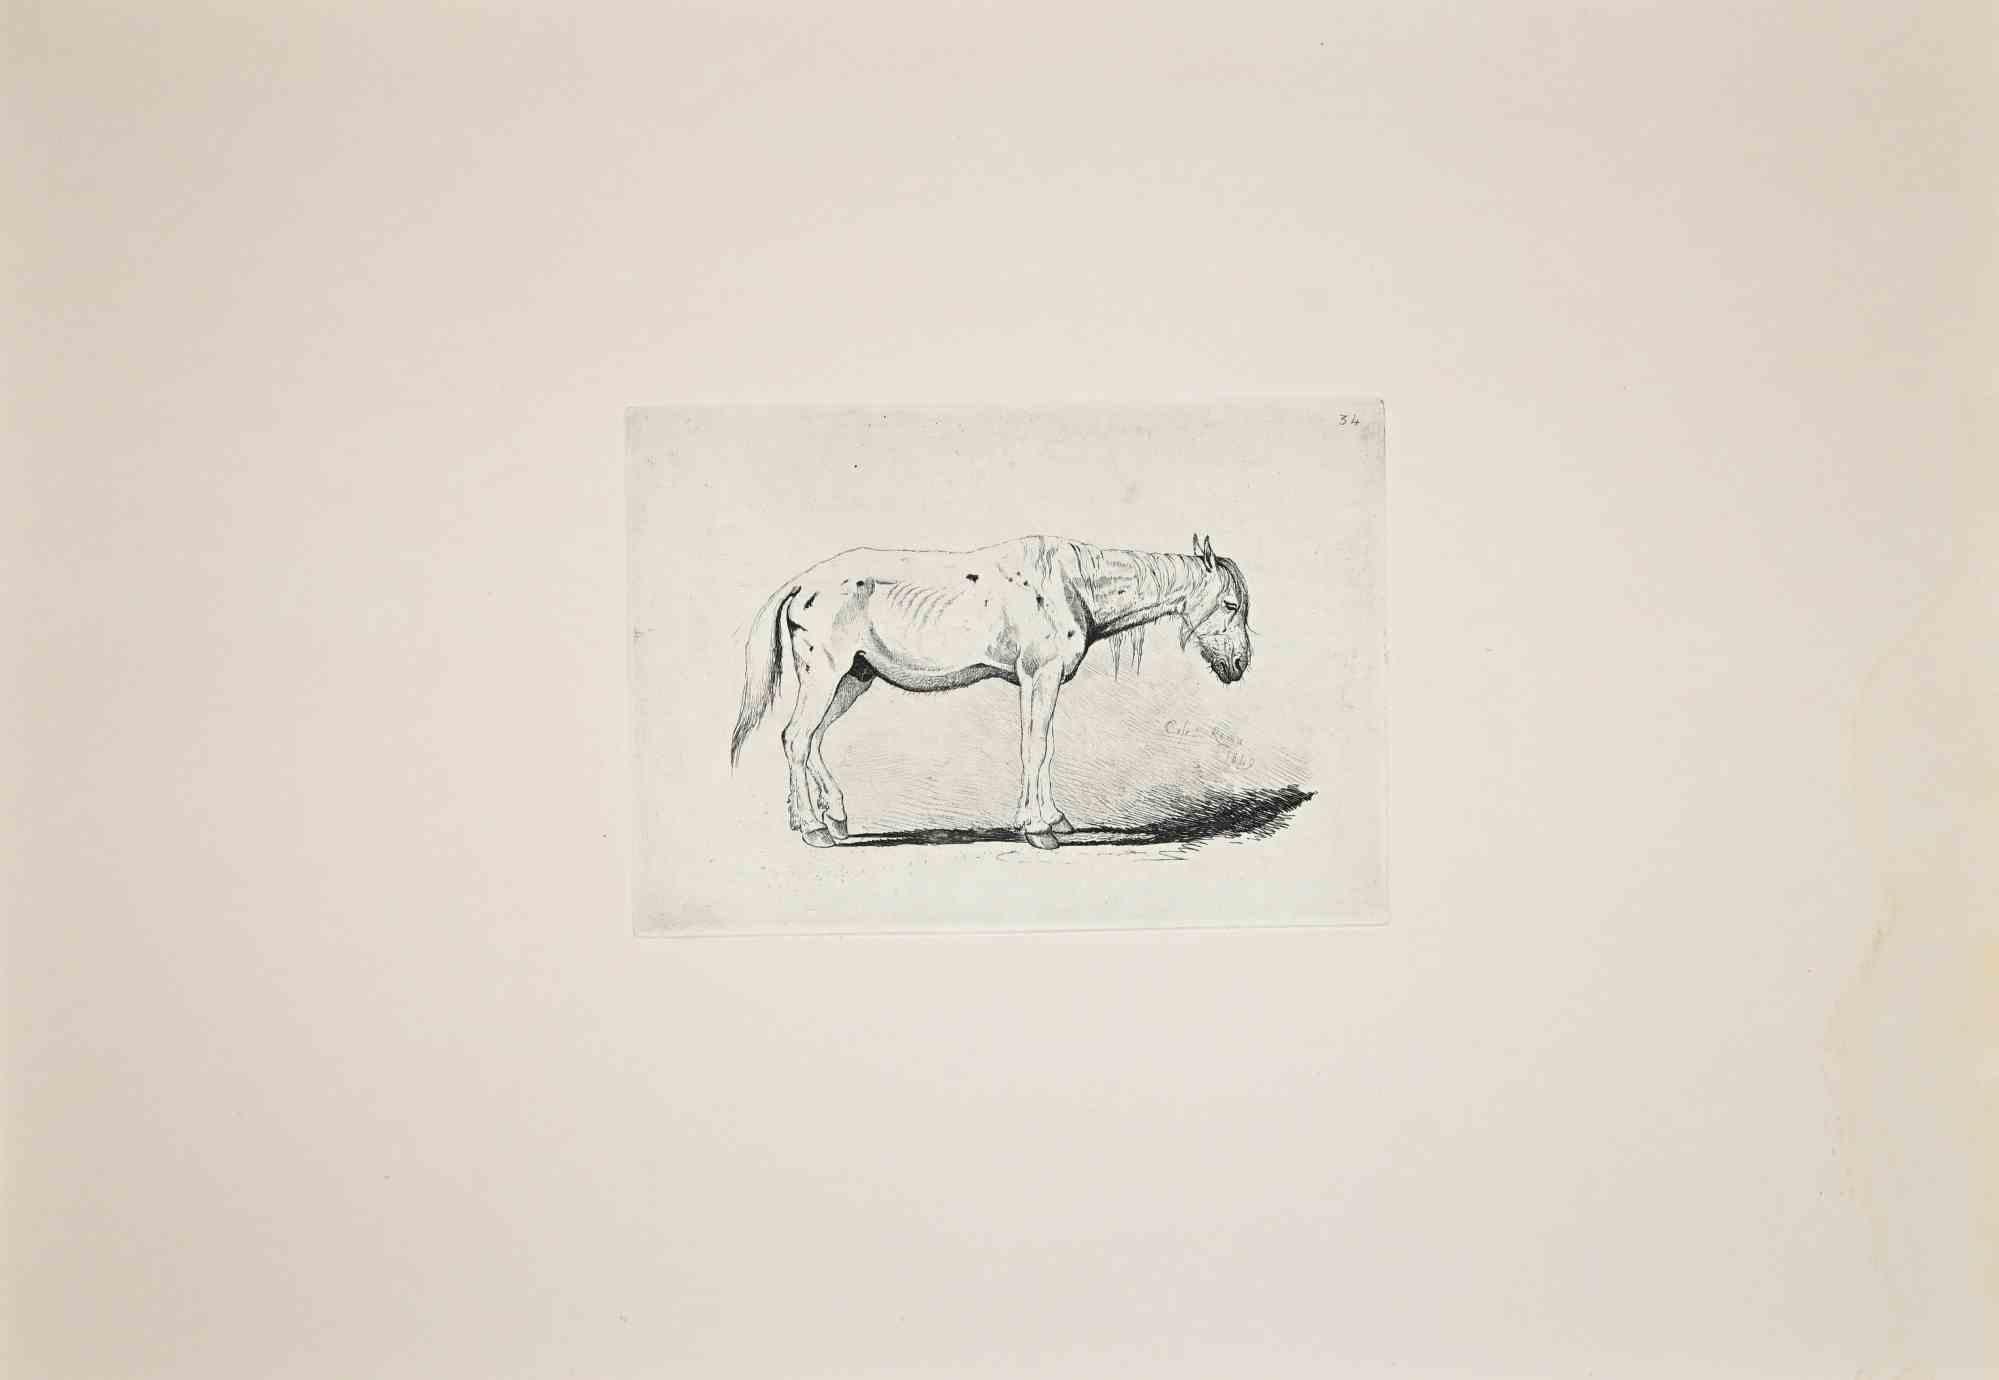 The Donkey - Etching After Charles Coleman - 1992